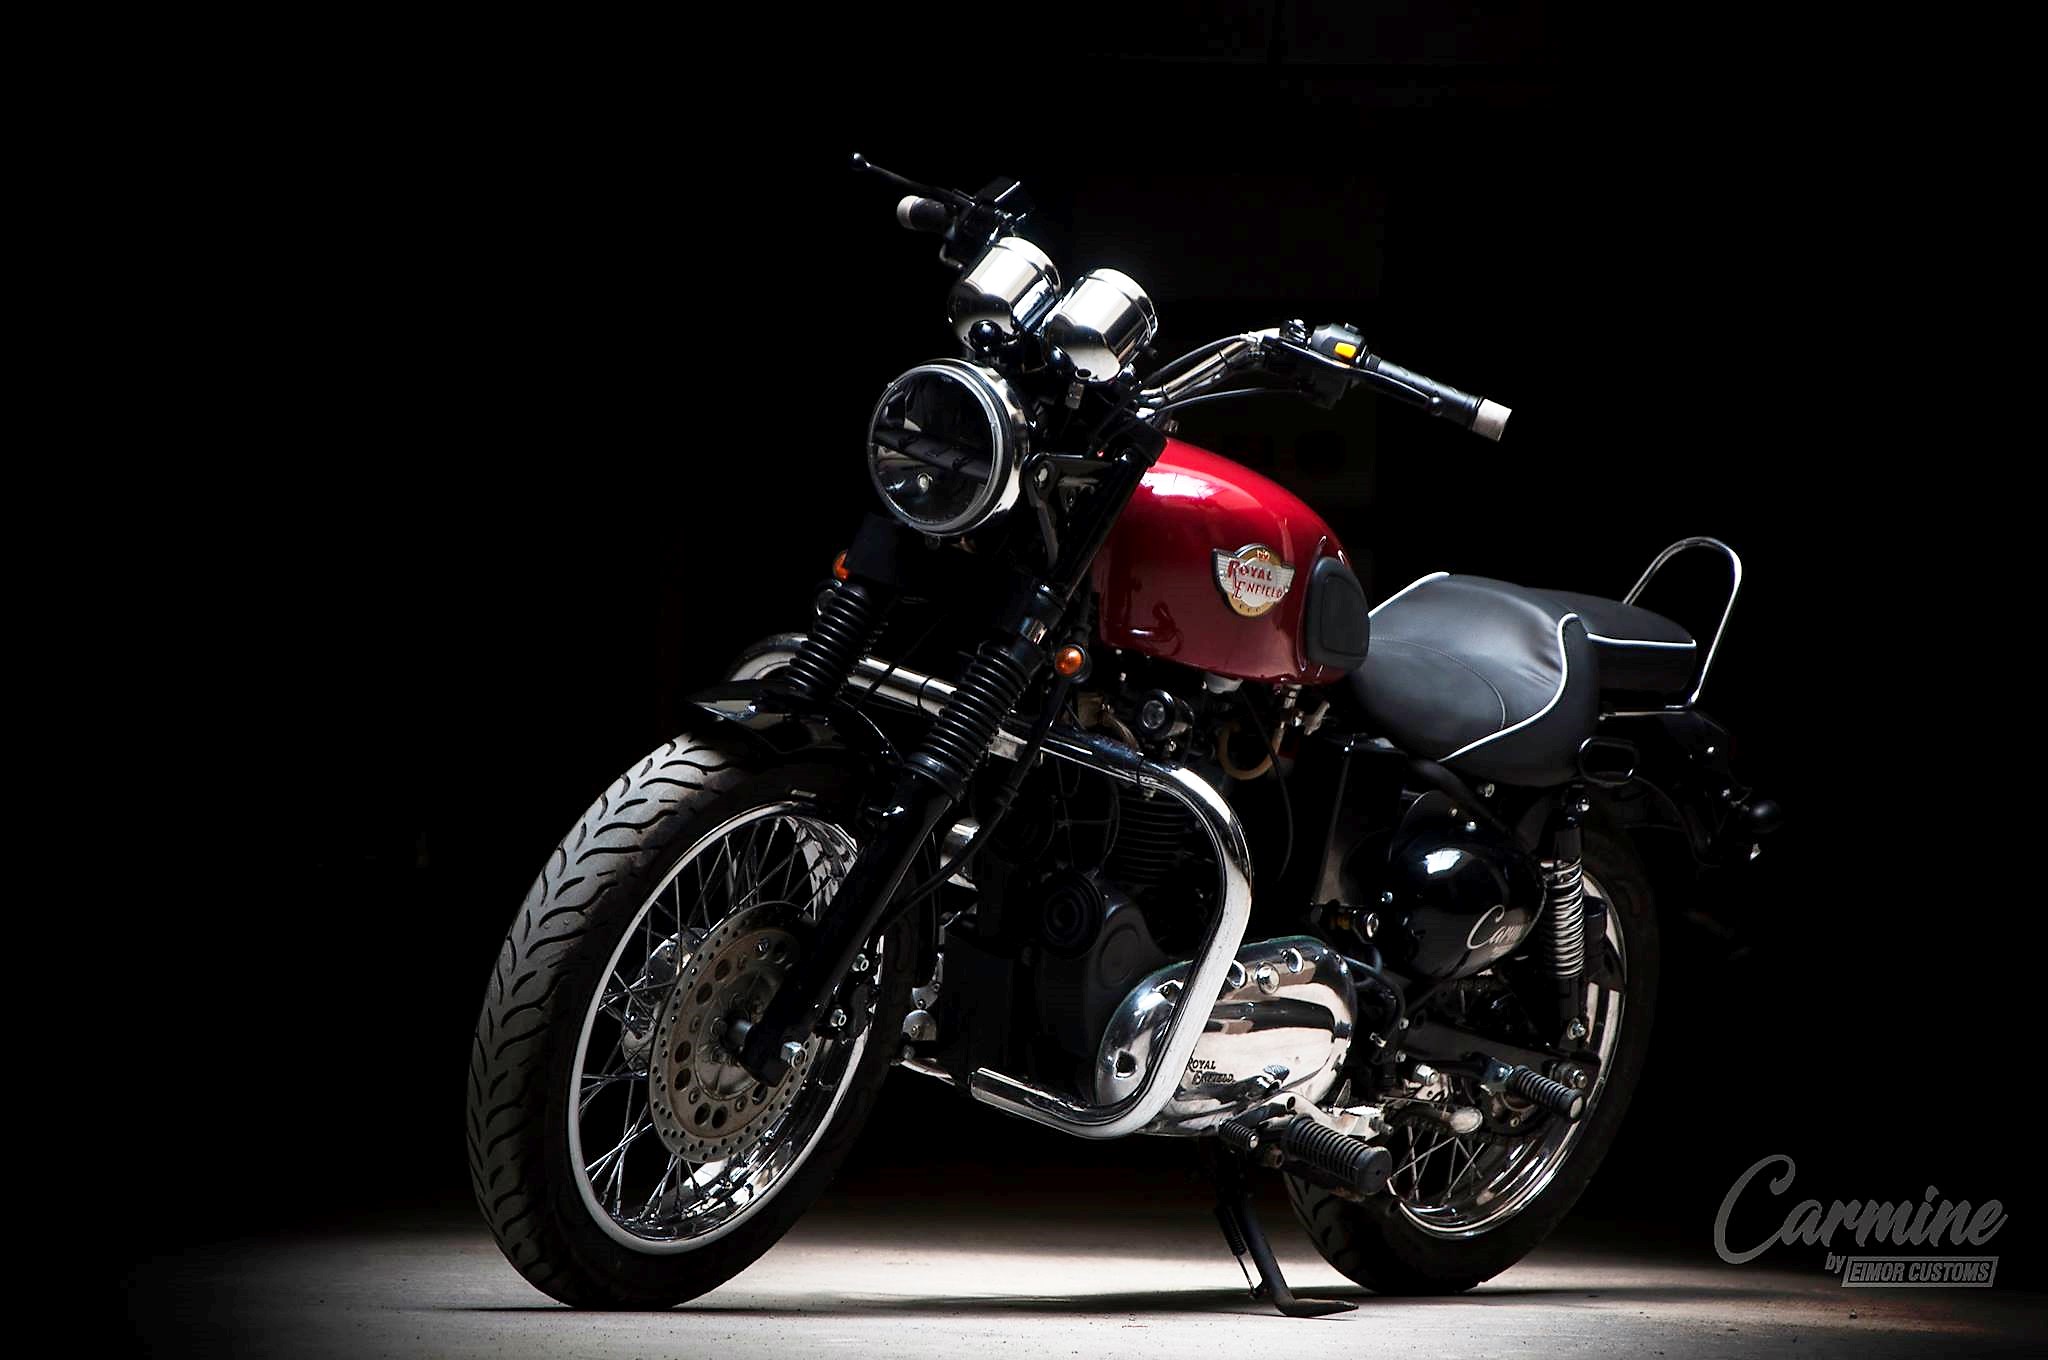 Meet Royal Enfield Carmine 350 Equipped with Premium Parts - close-up